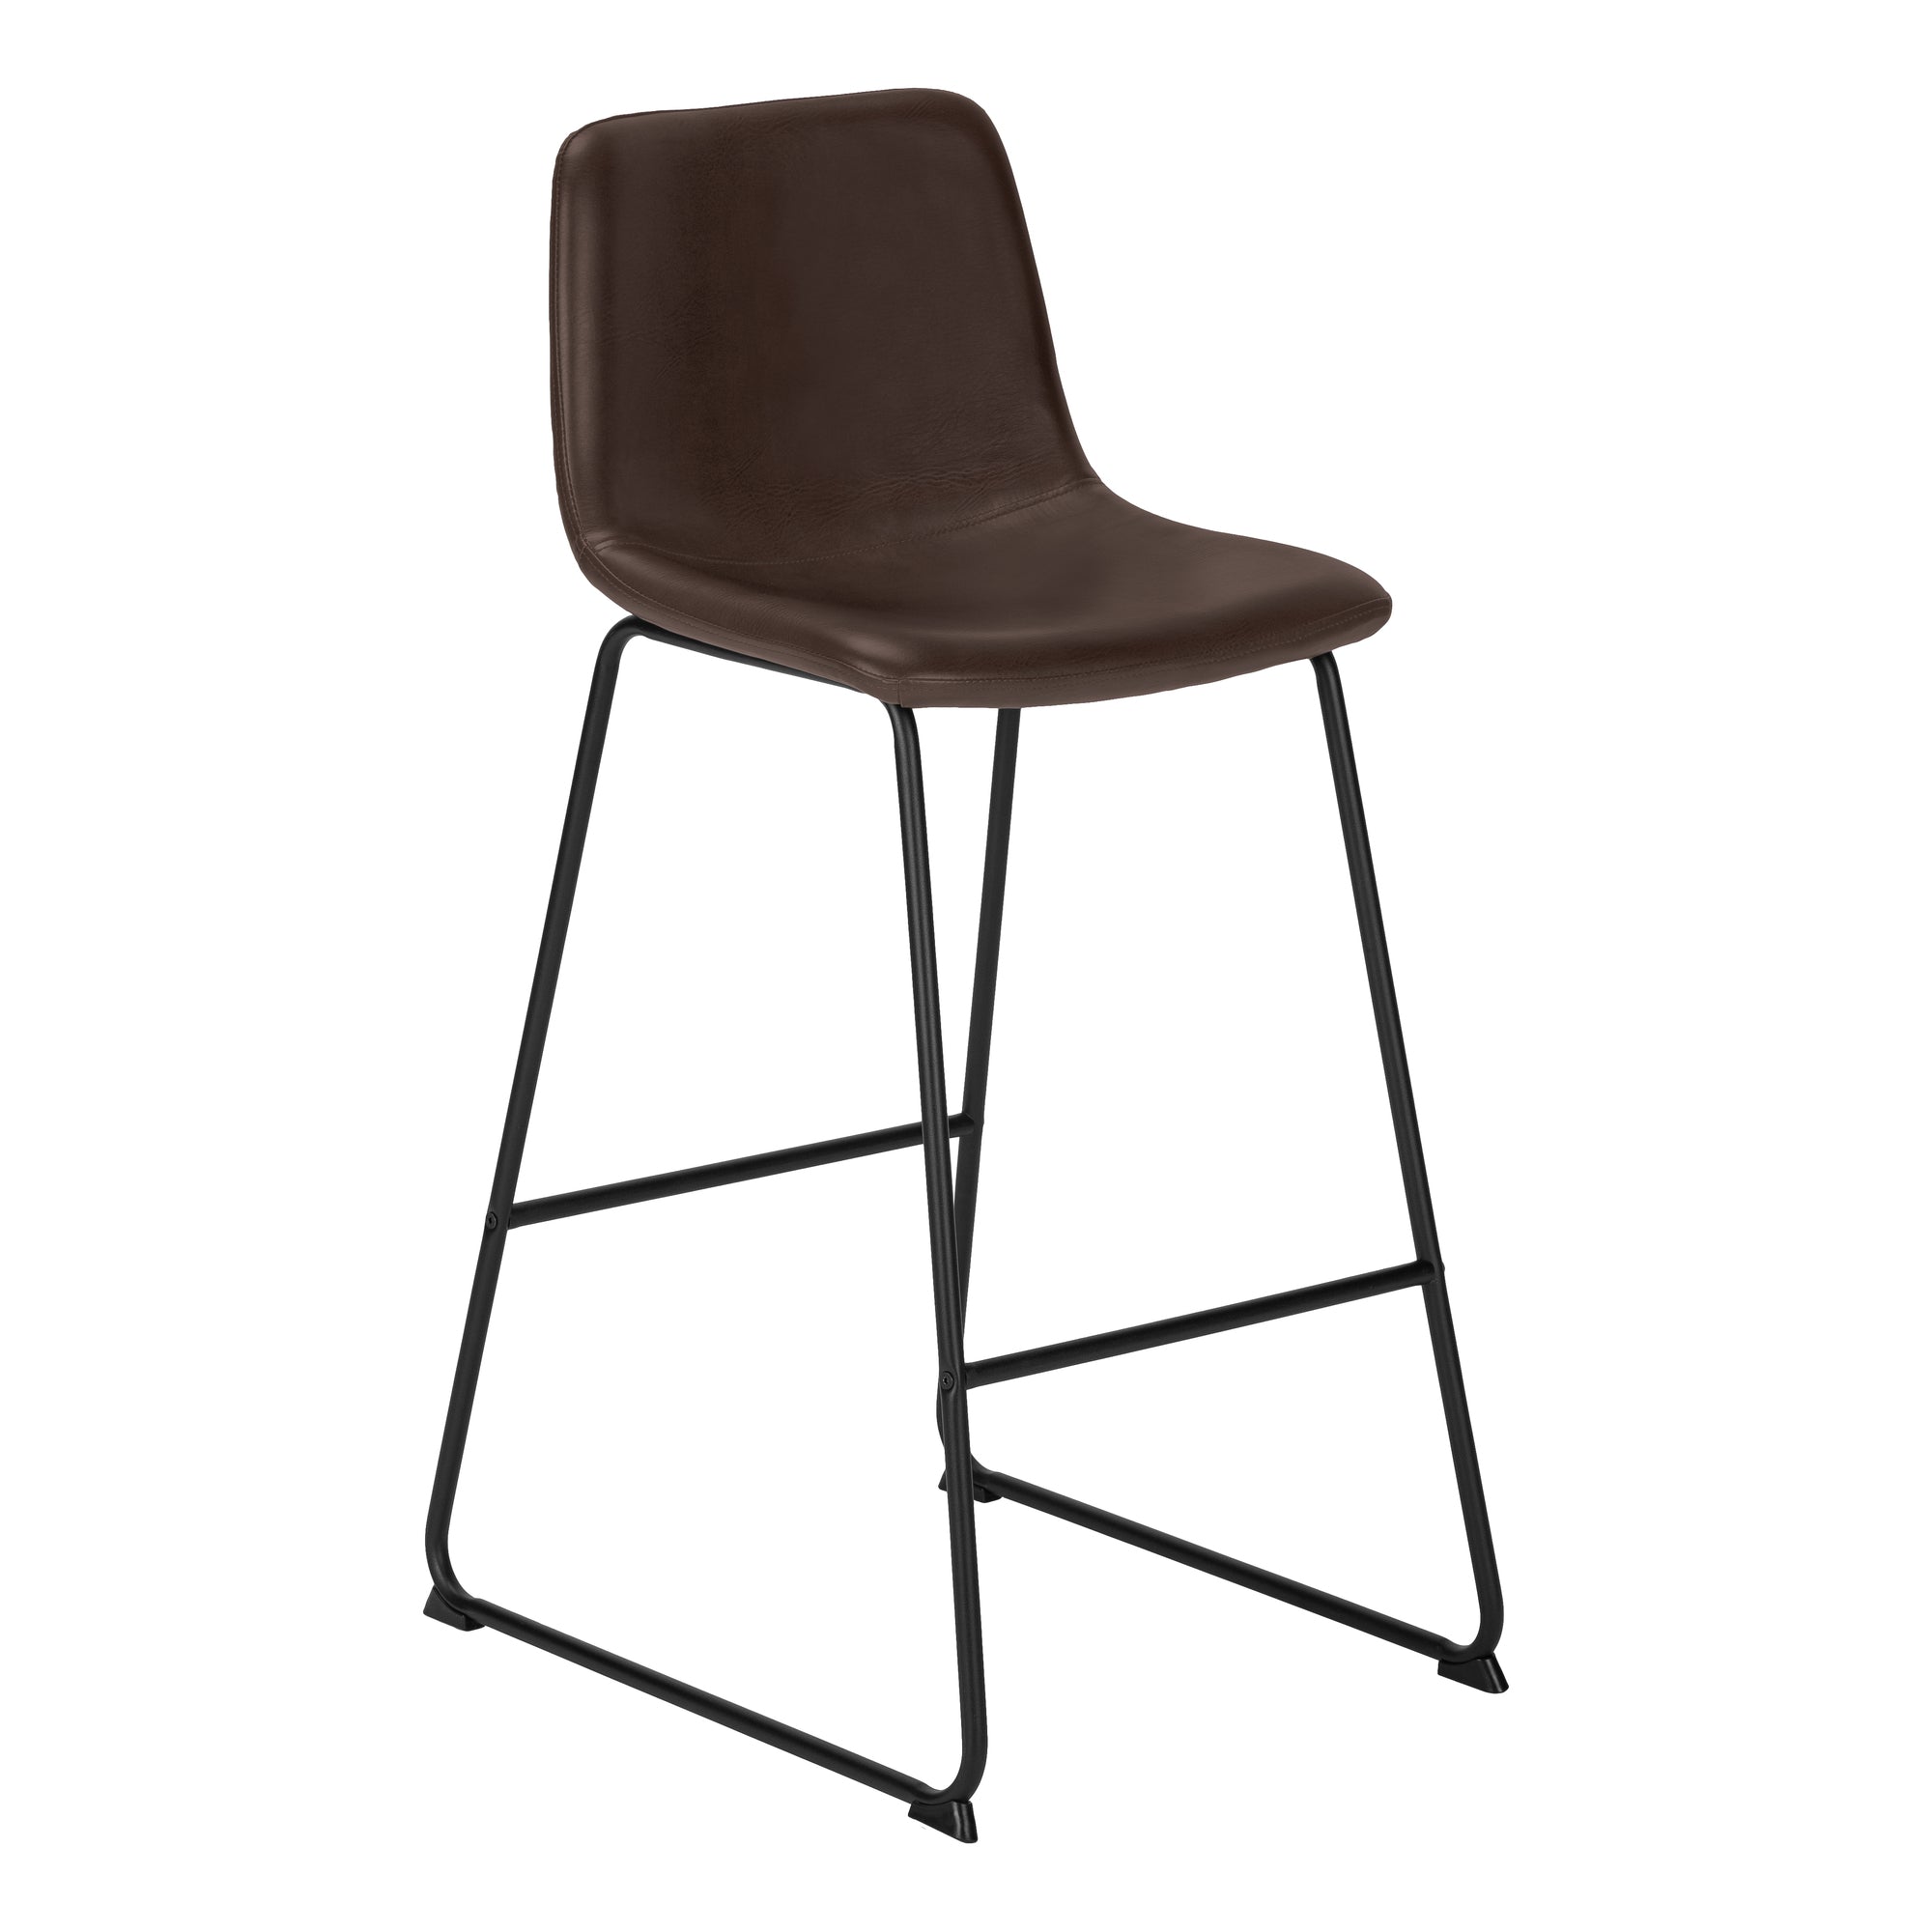 MN-127753    Office Chair - Standing Desk / Metal Frame - Curved Backrest / Brown Leather-Look / Black